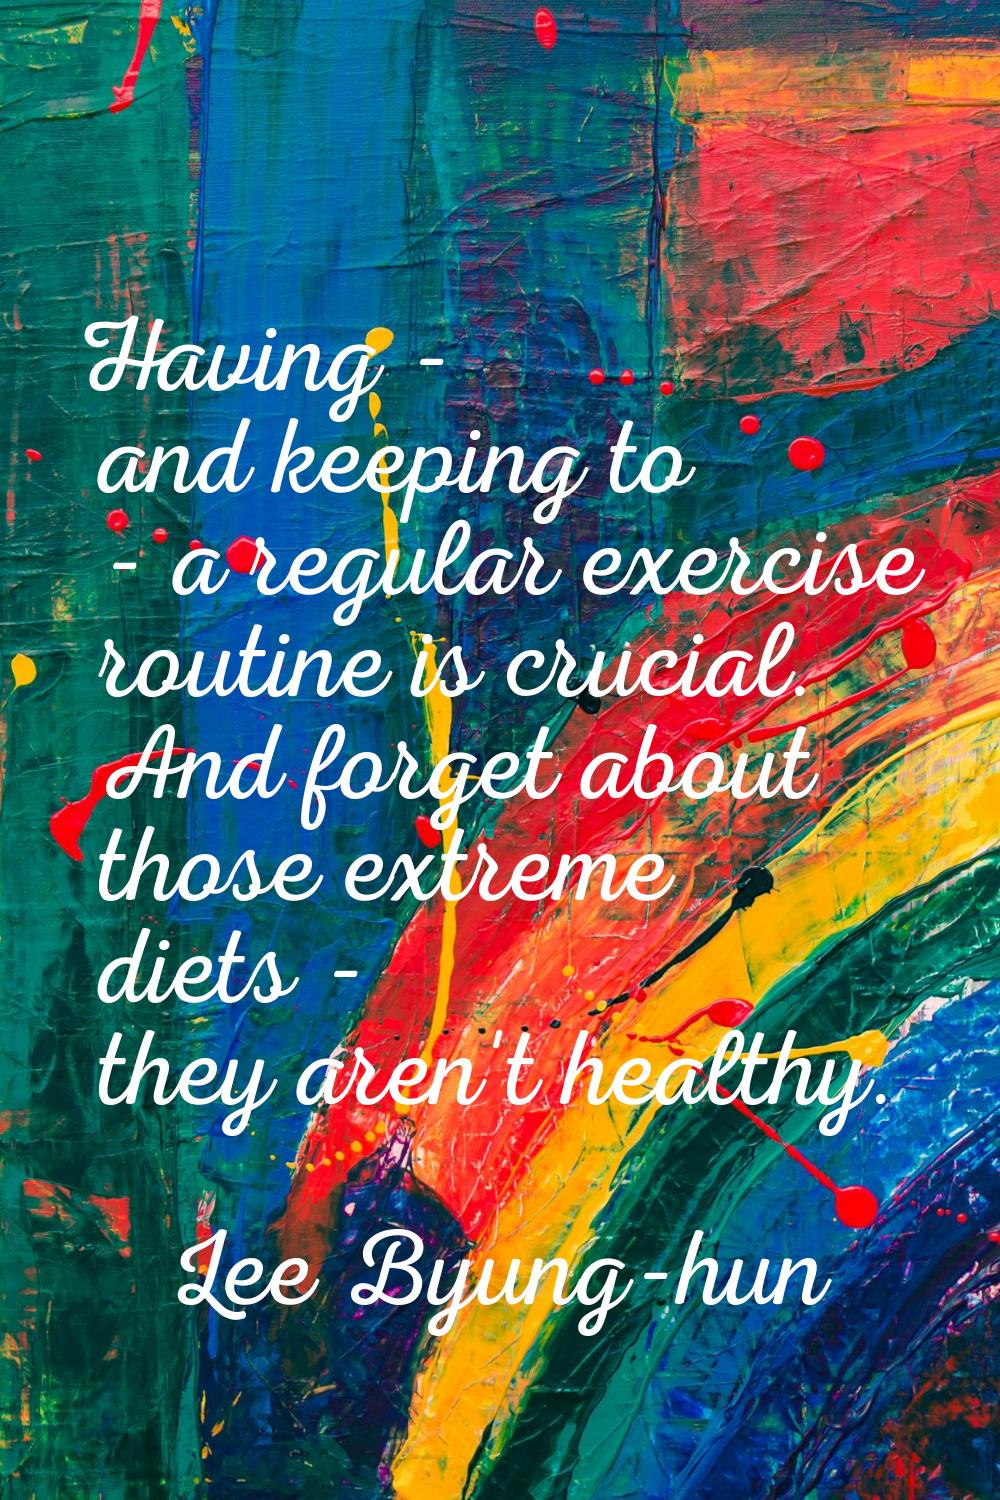 Having - and keeping to - a regular exercise routine is crucial. And forget about those extreme die